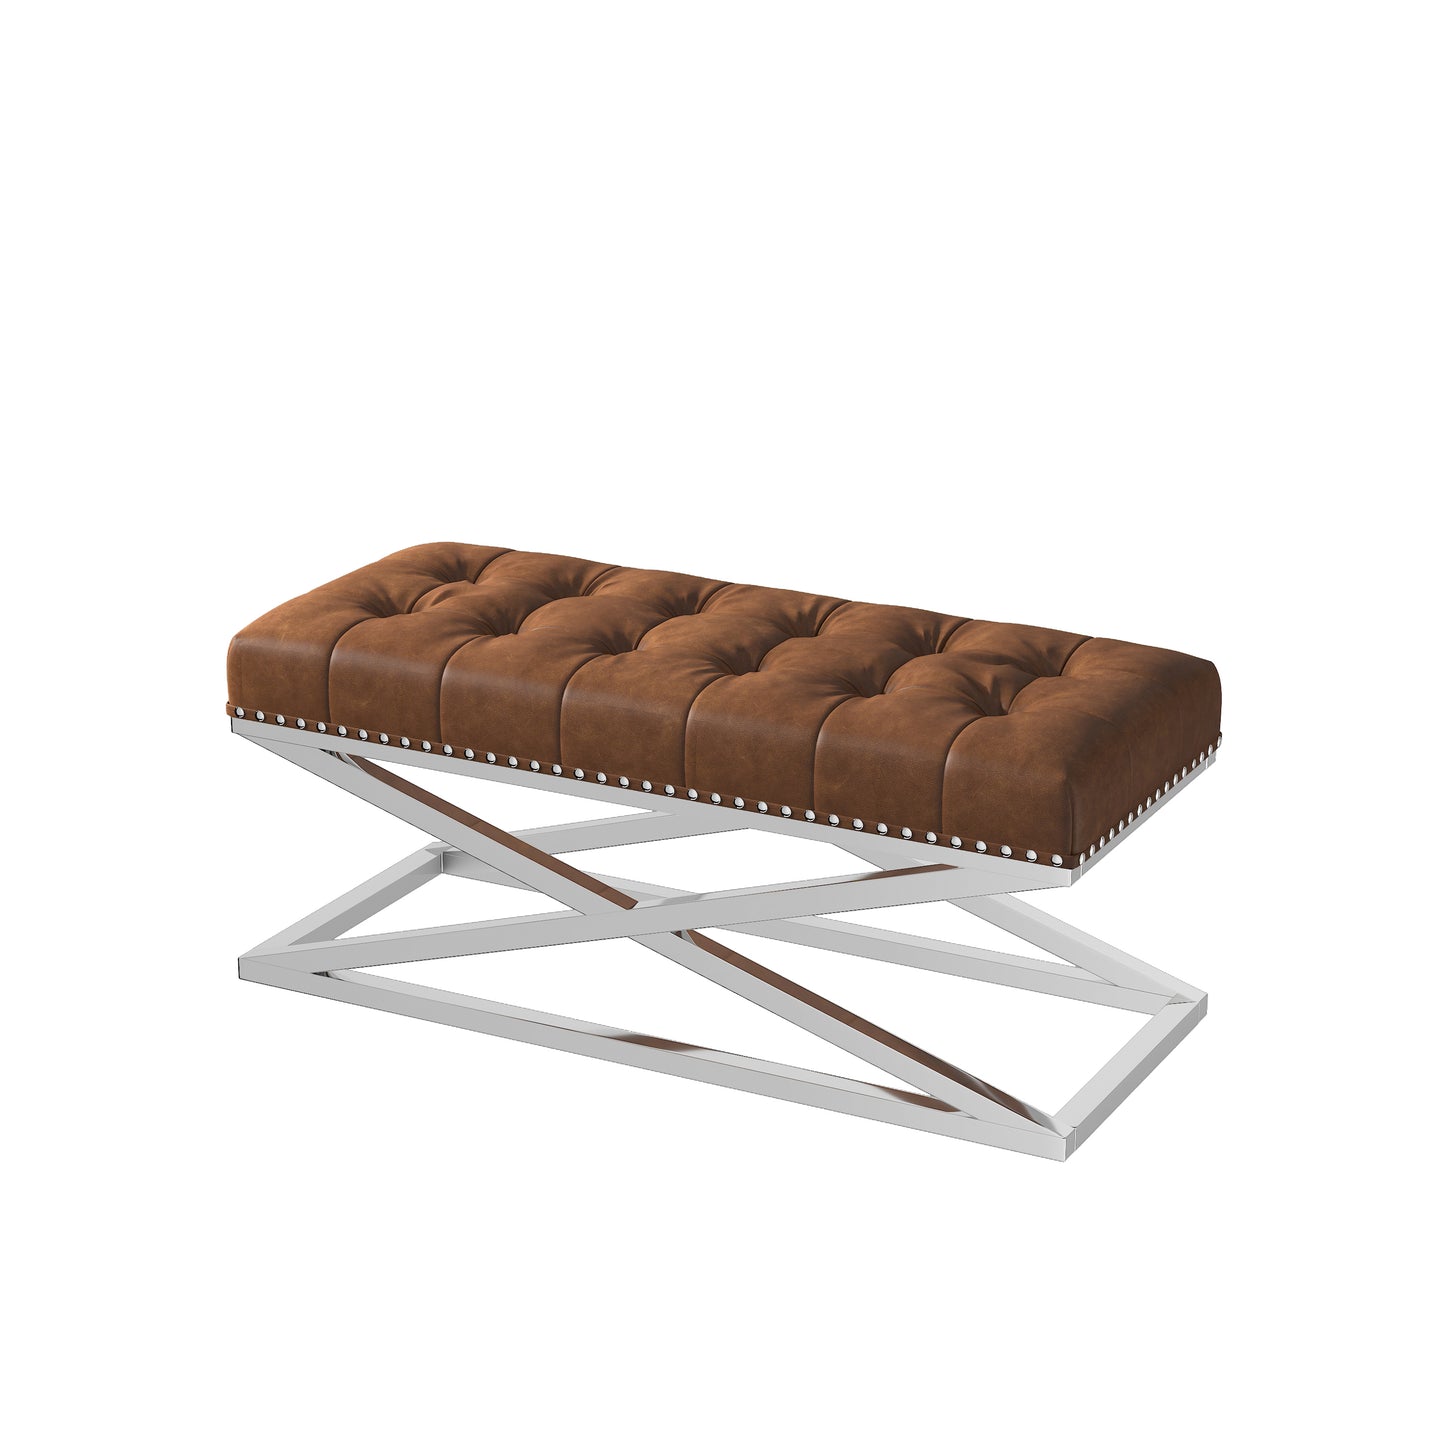 Stainless Steel Base with Vintage Vegan Leather Bench (light brown)